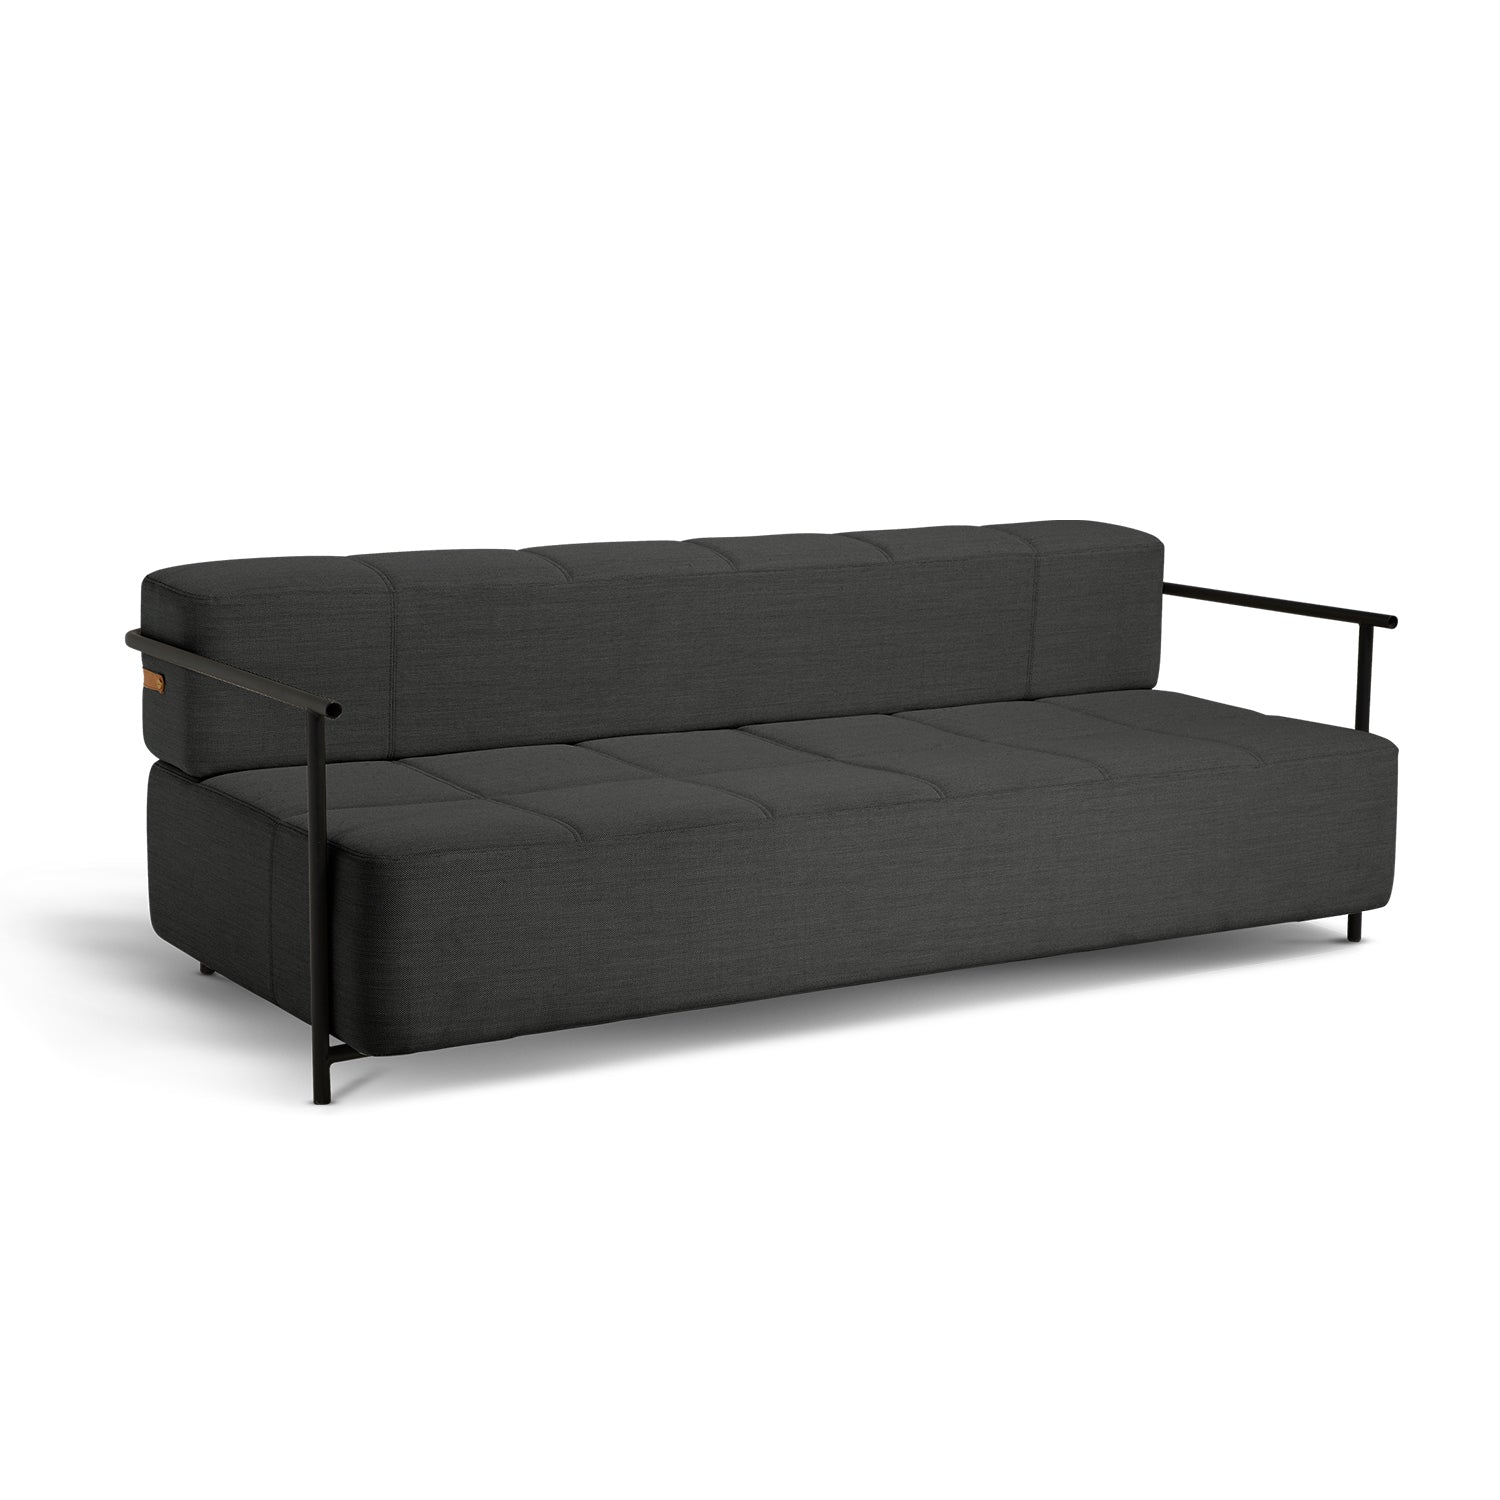 Northern Daybe Sofabed with Armrest in Dark Grey